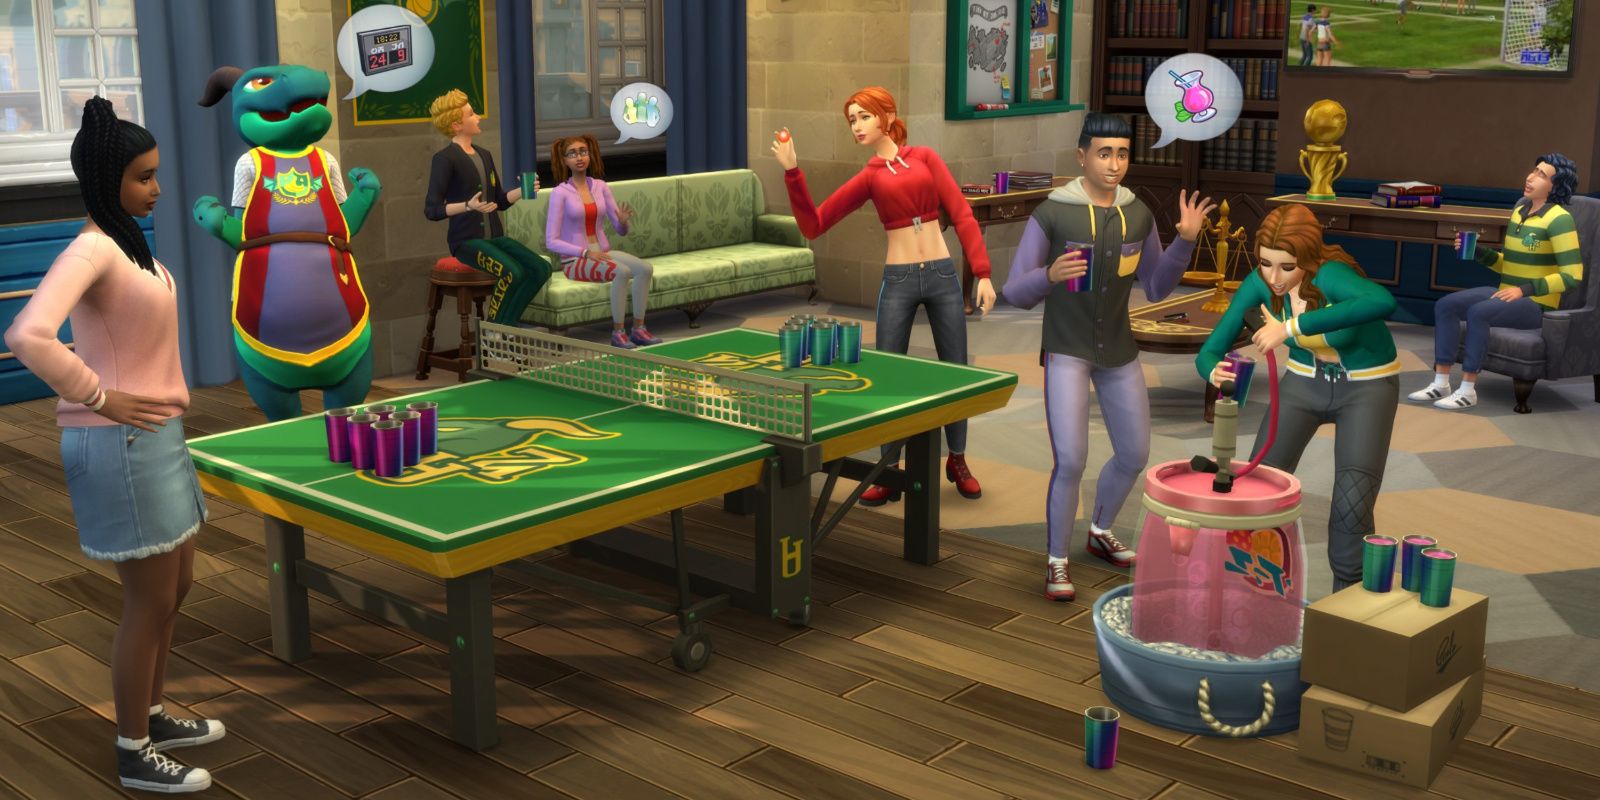 A collection of Sims play beer pong at university in The Sims 4